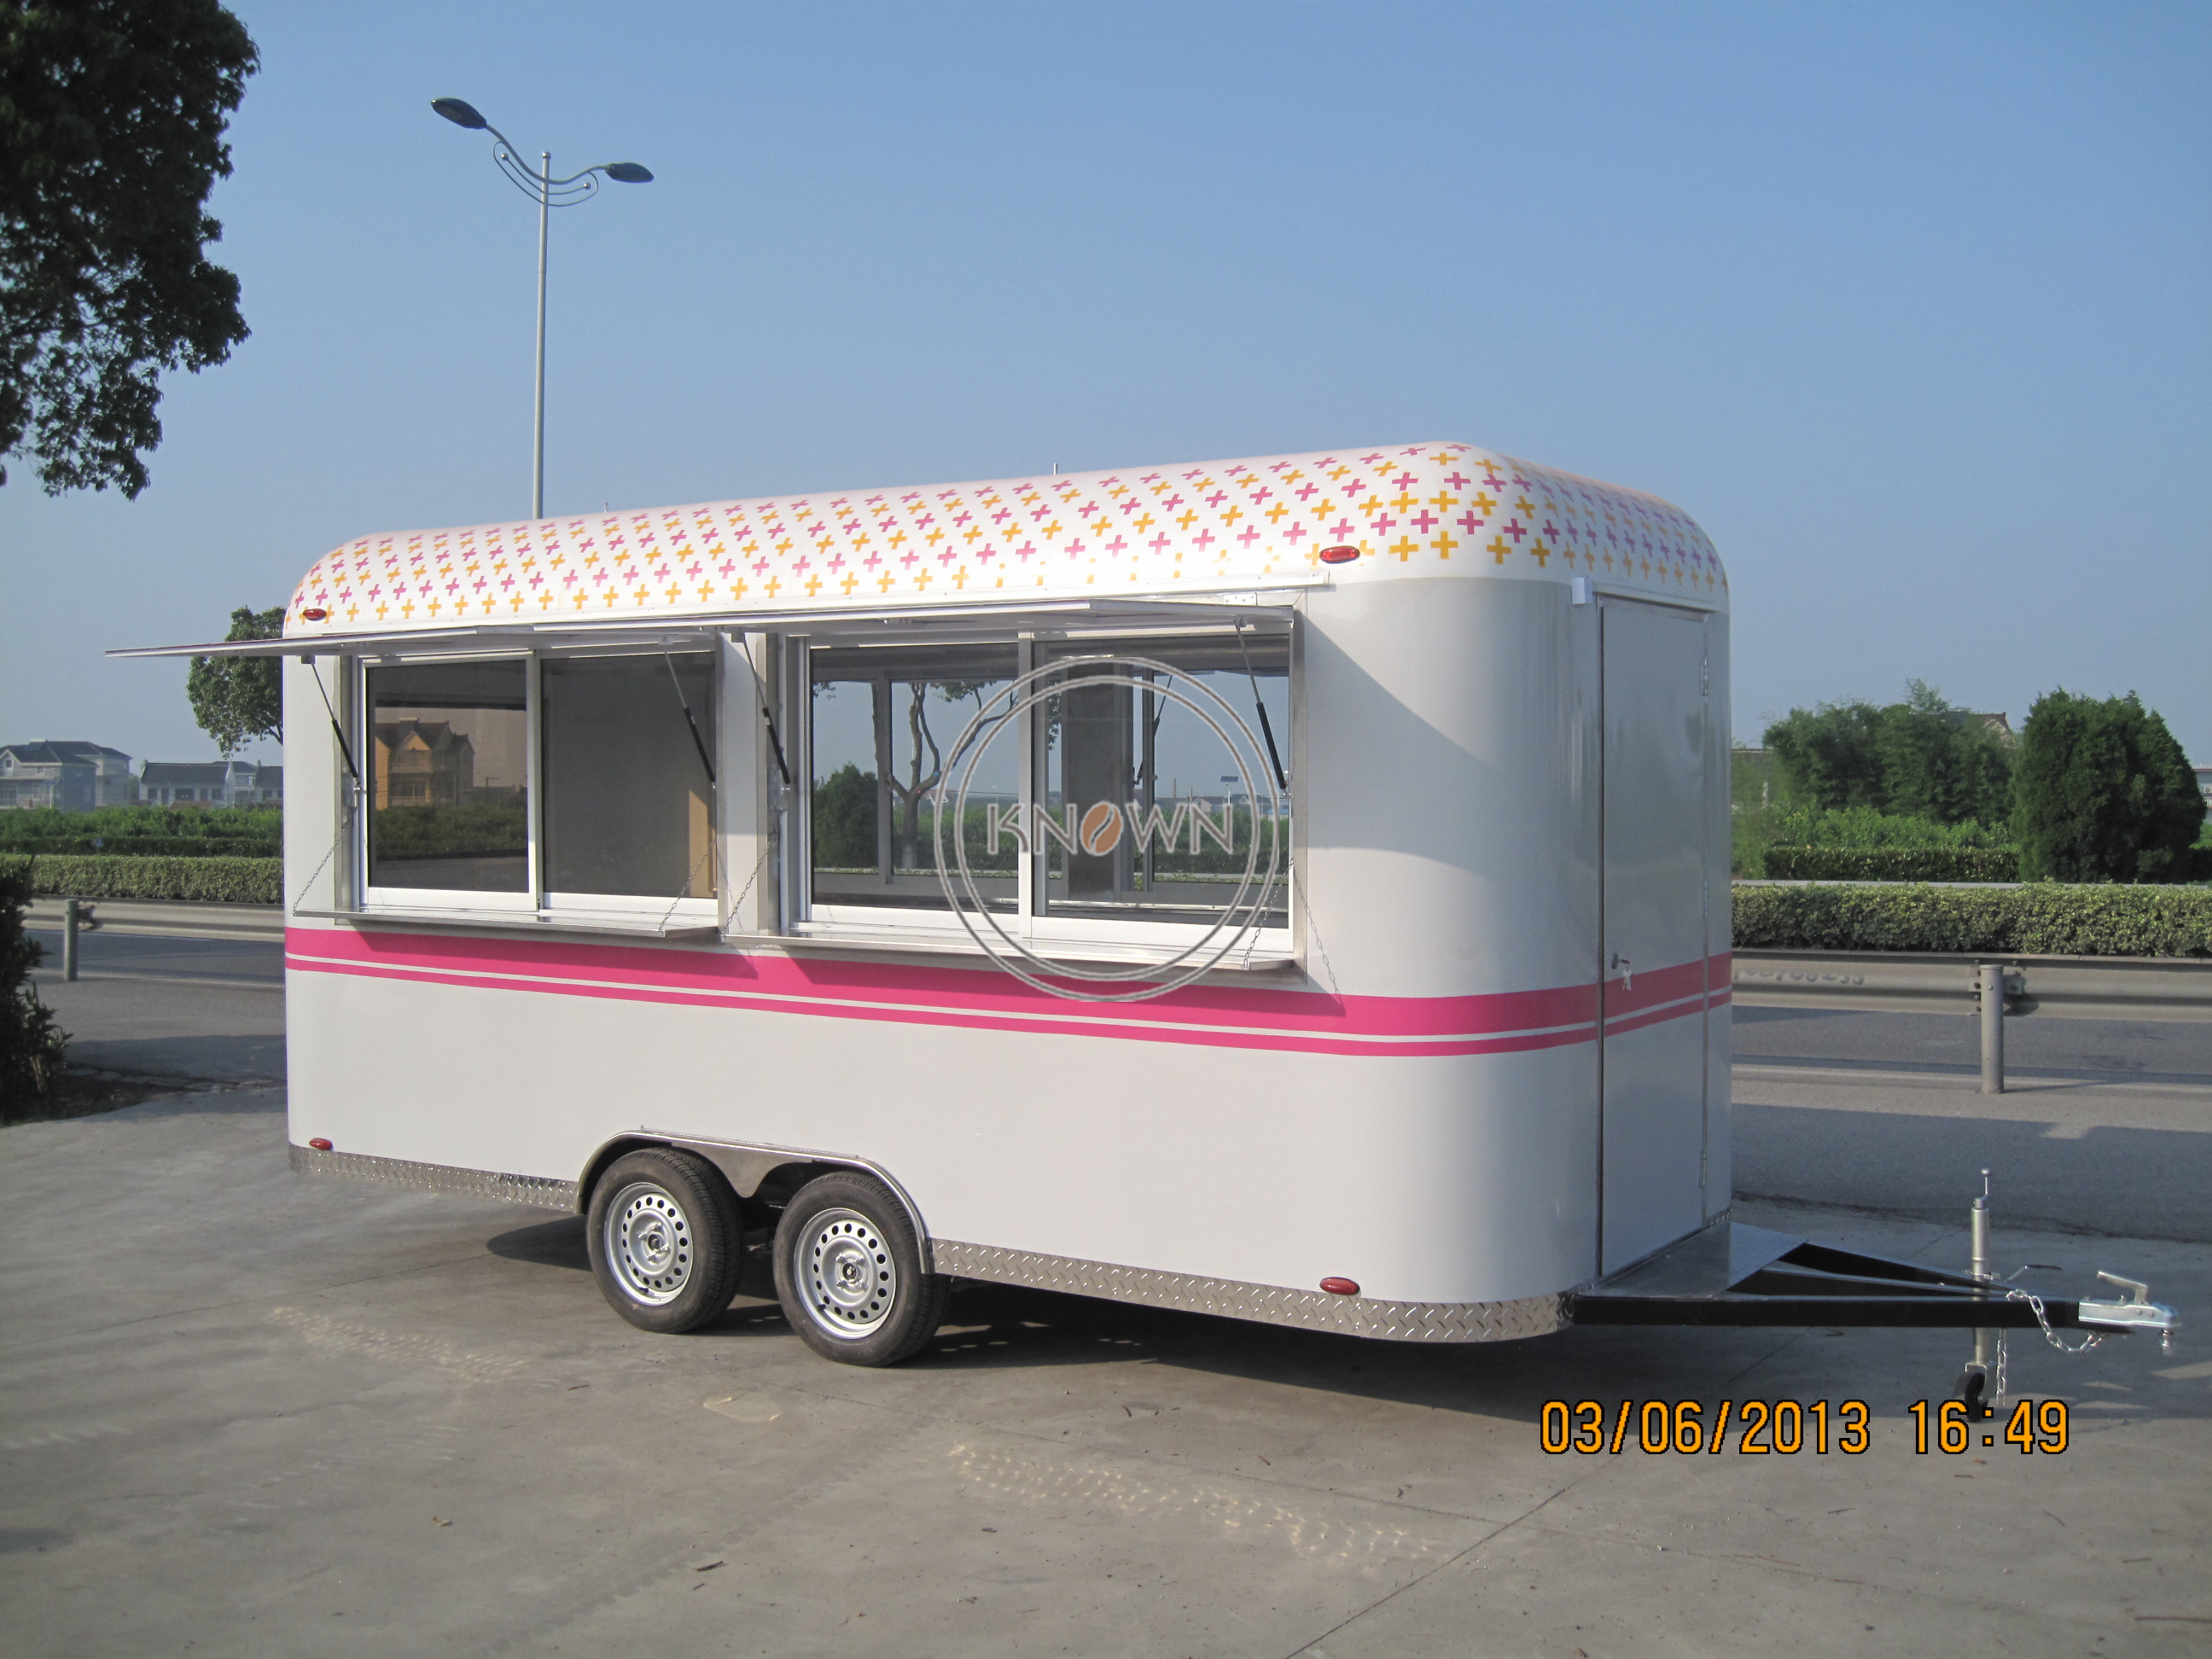 KN-400A Mobile Kitchen Outdoor Food Trailer Food Vending Truck Food Trailer / Food Truck / Food Cart 